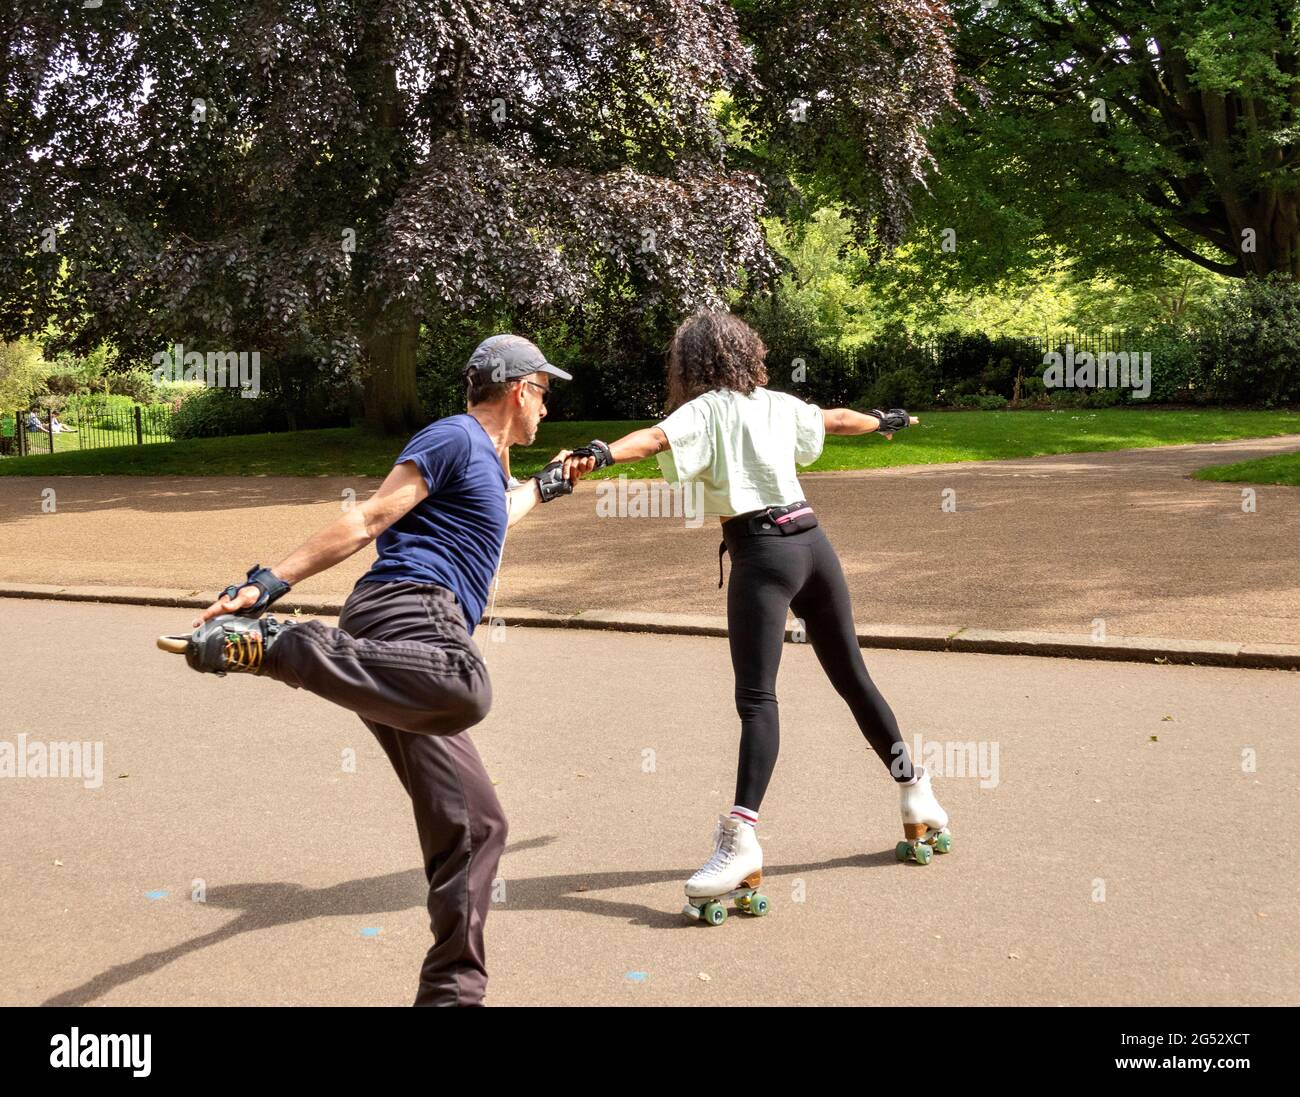 LONDON HYDE PARK LONDON'S CULTURAL DIVERSITY ROLLER SKATING IN STYLE IN THE  SERPENTINE ROAD Stock Photo - Alamy